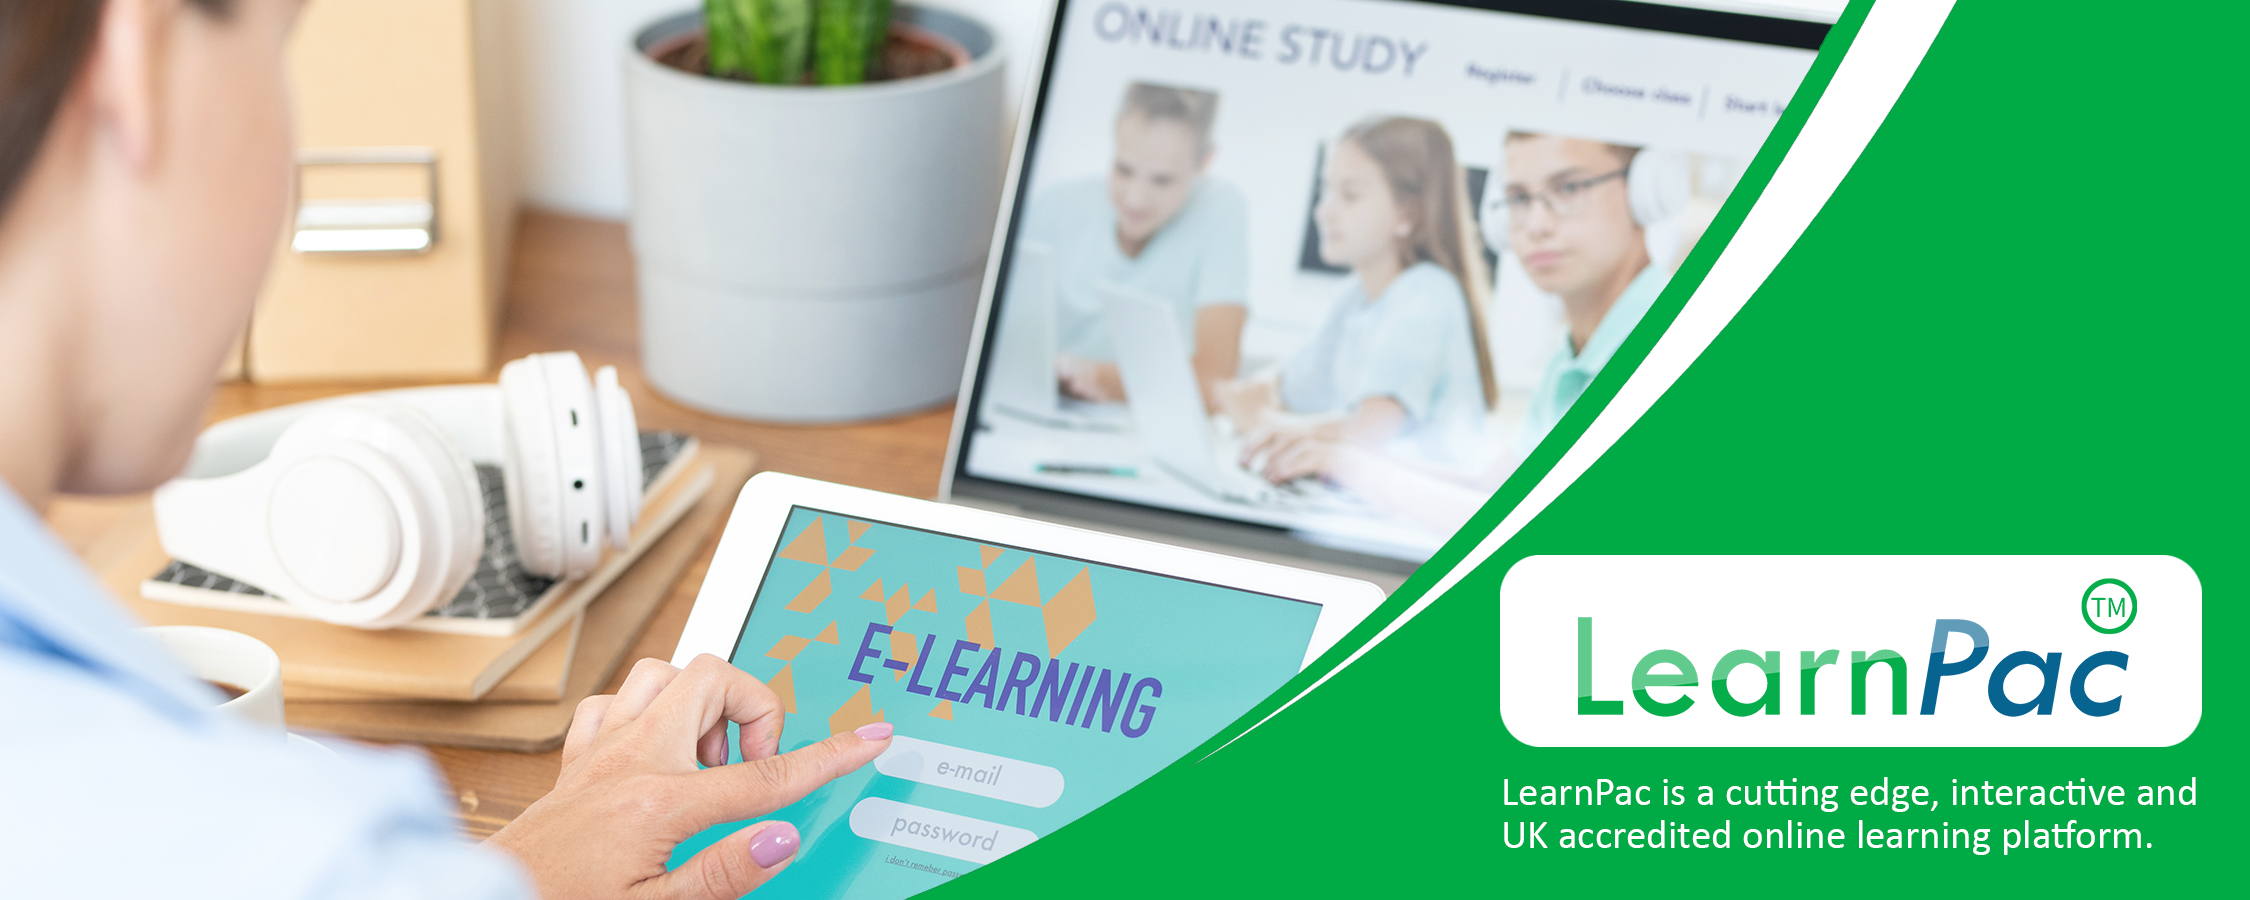 Prepare for and Support Quality Audits - Level 3 - Online Learning Courses - E-Learning Courses - LearnPac Systems UK -